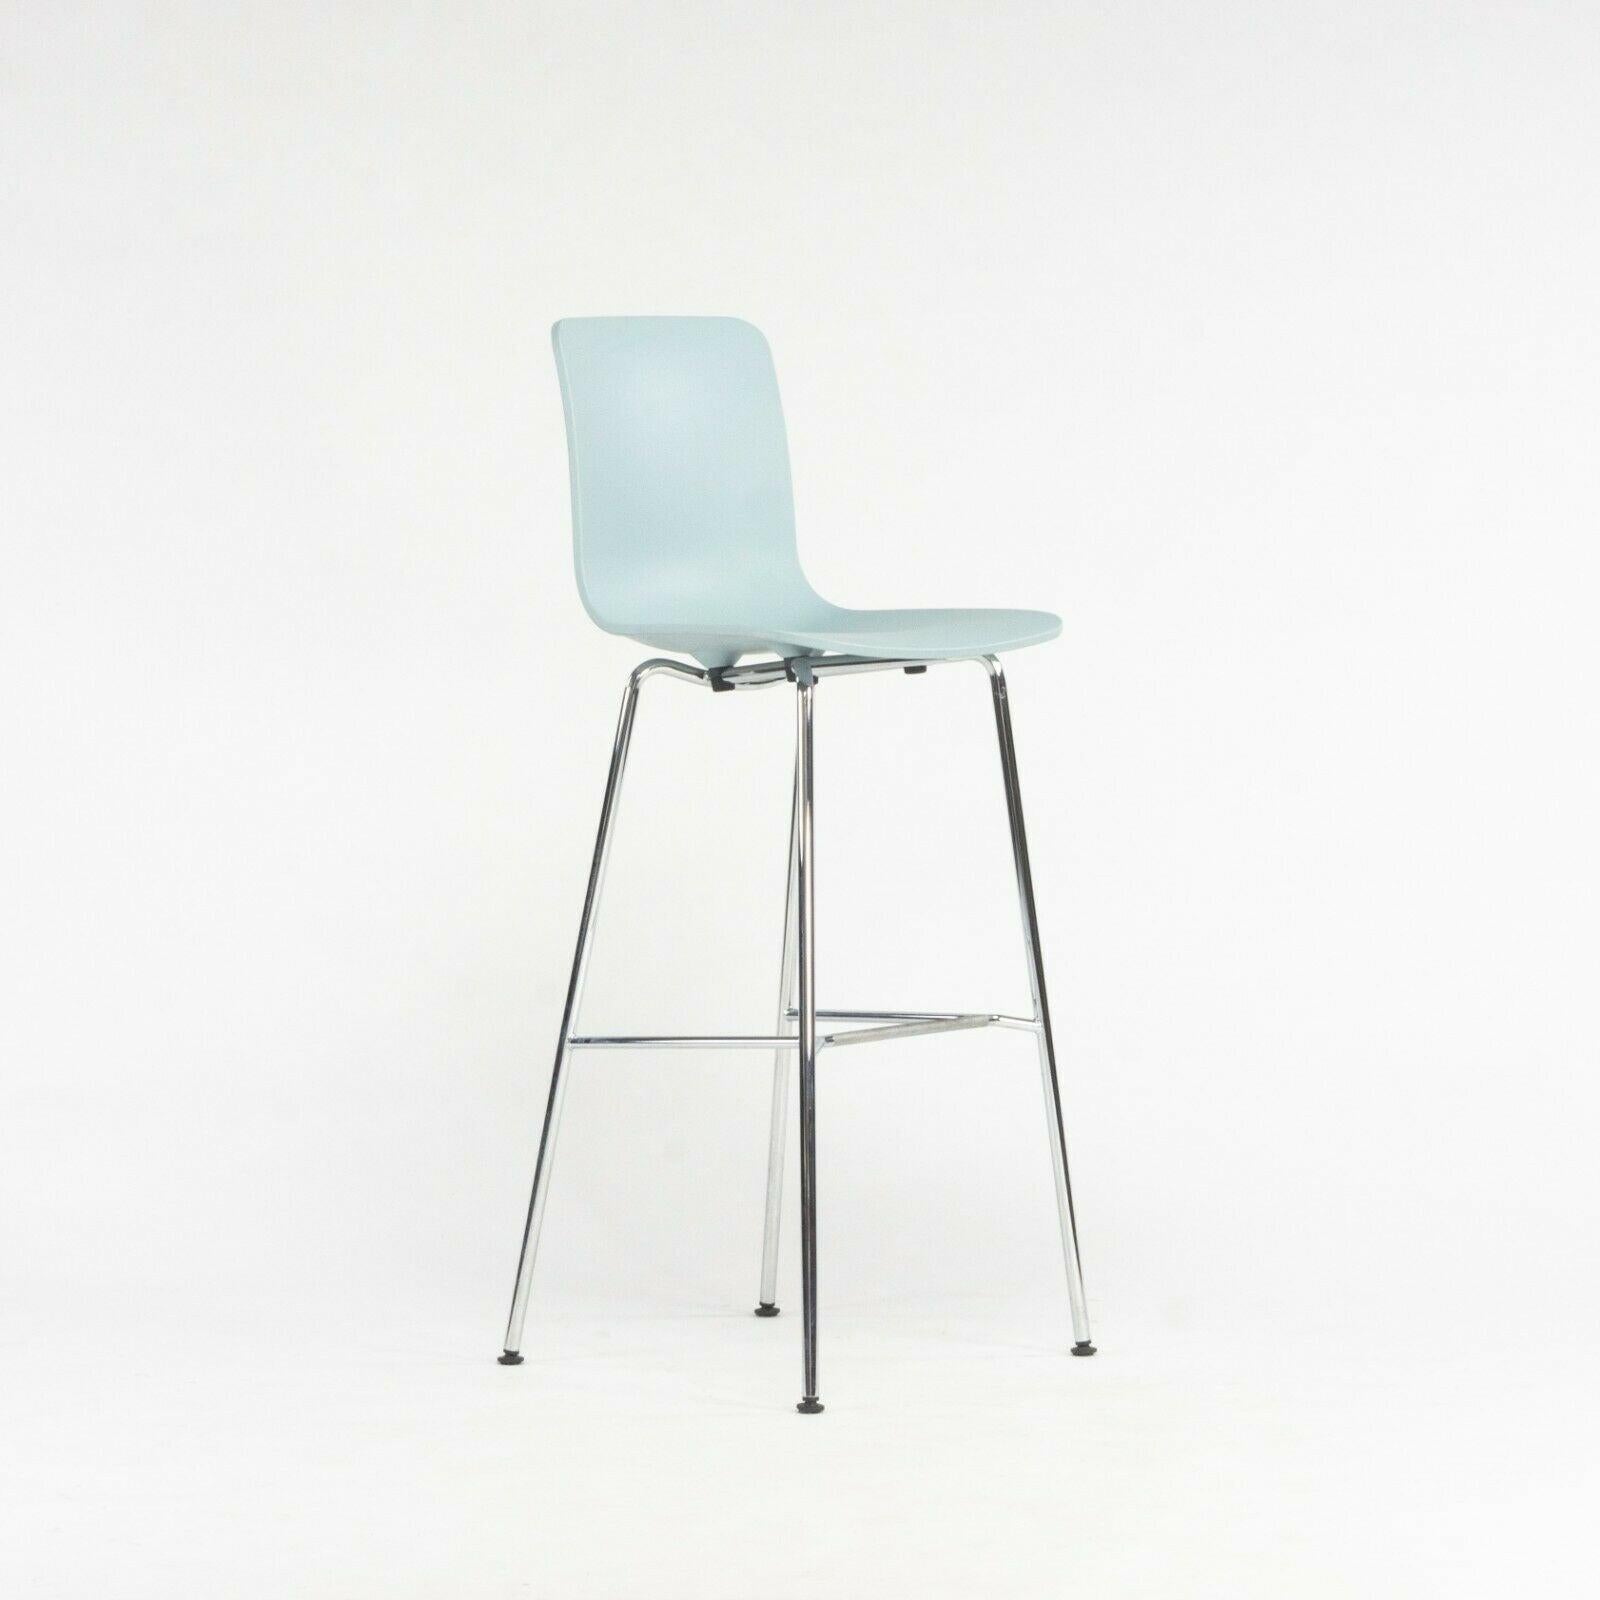 Listed for sale is a Jasper Morrison for Vitra HAL bar stool in ice gray (looks like baby blue). The chair was acquired directly from Vitra, as they recently moved one of their warehouses to a new location. The chair was produced circa 2020 and is